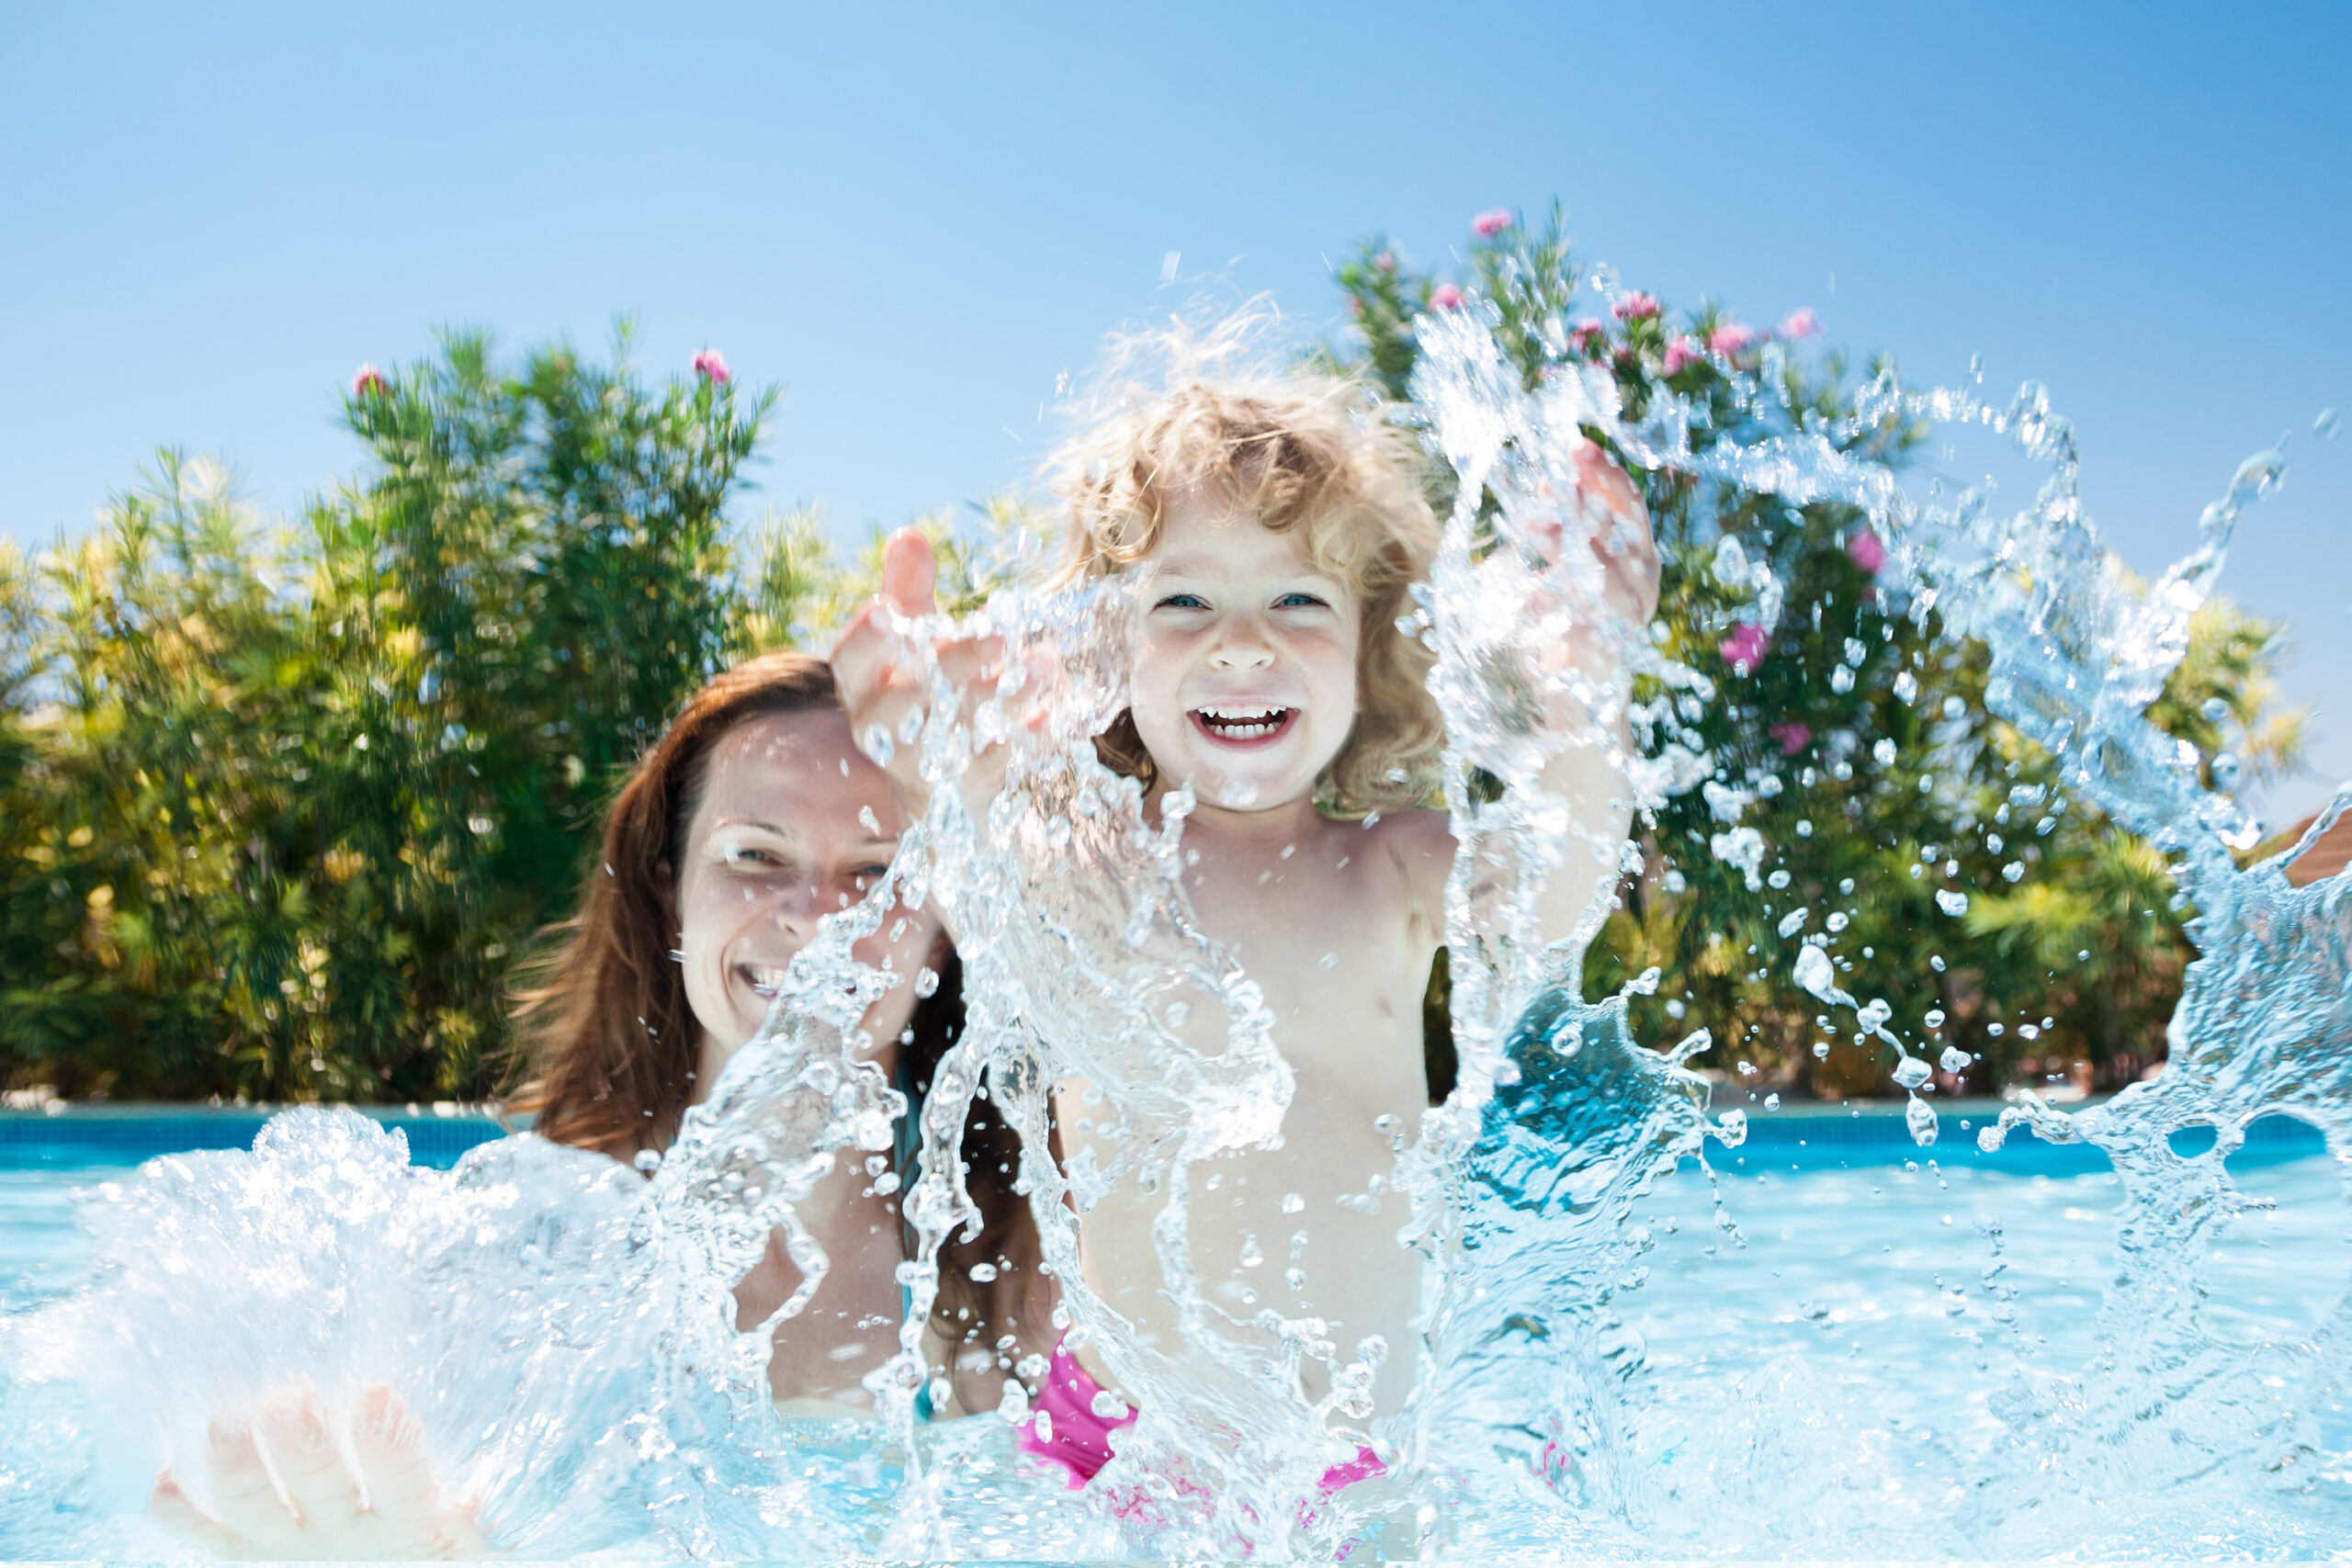 A baby and its mother joyfully splashing water in a pool, sharing a playful and bonding moment of fun and laughter.